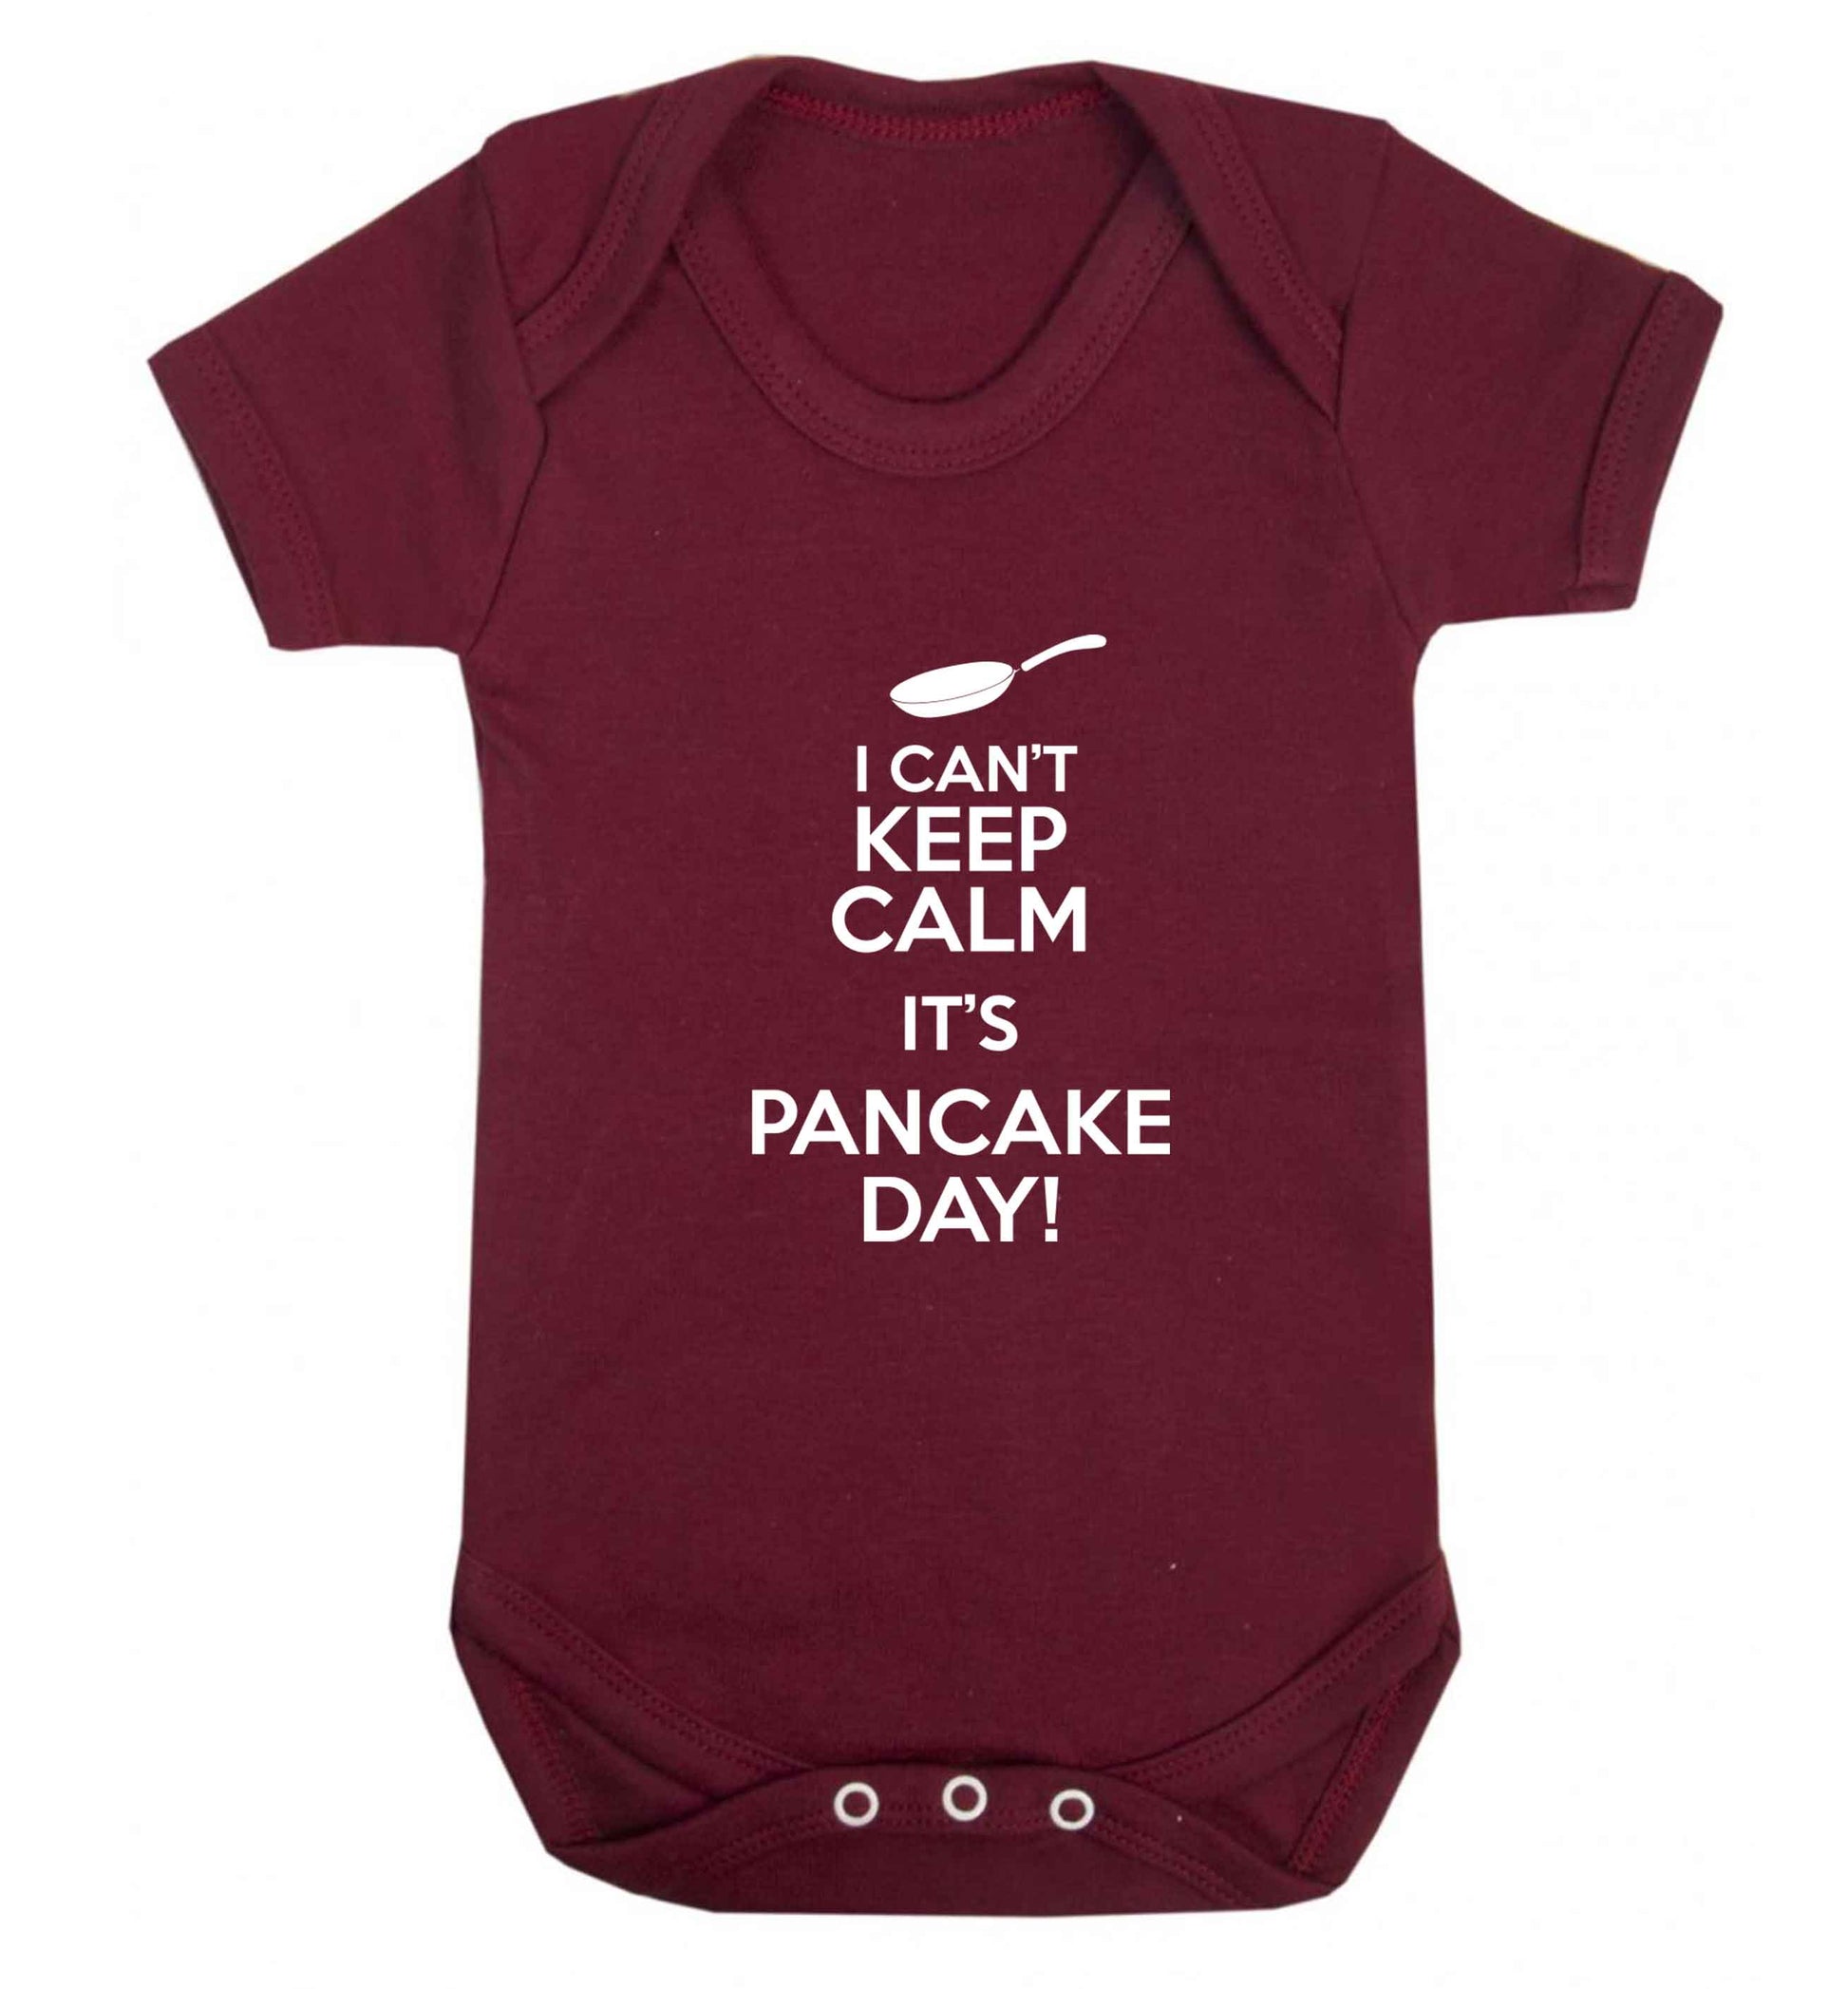 I can't keep calm it's pancake day! baby vest maroon 18-24 months